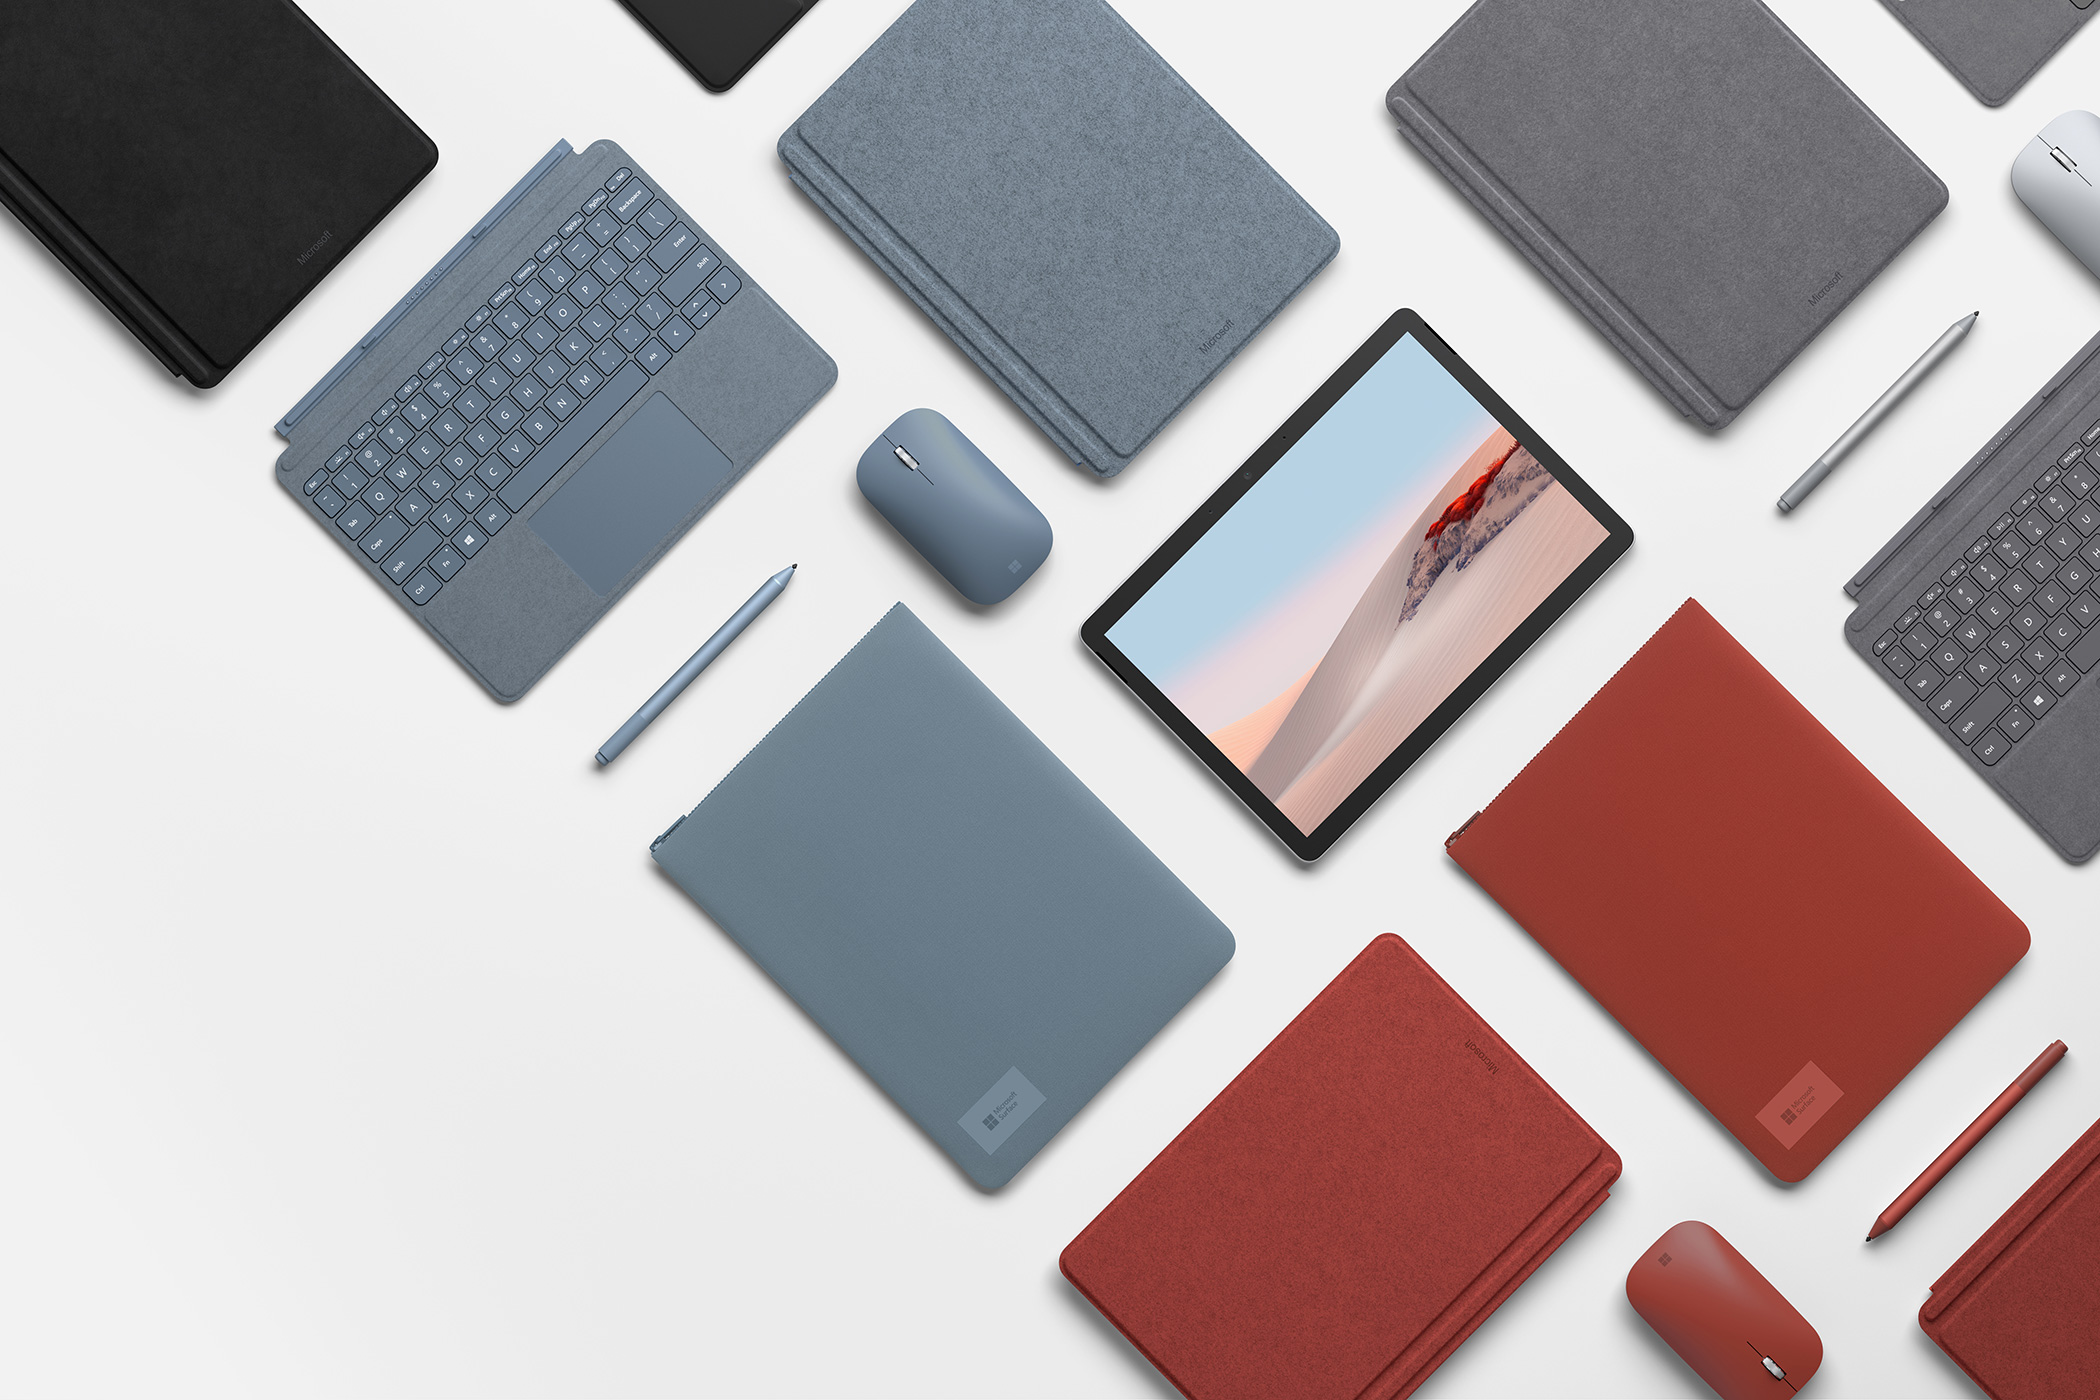 Introducing Surface Go 2, Surface Book 3, Surface Headphones 2 and 